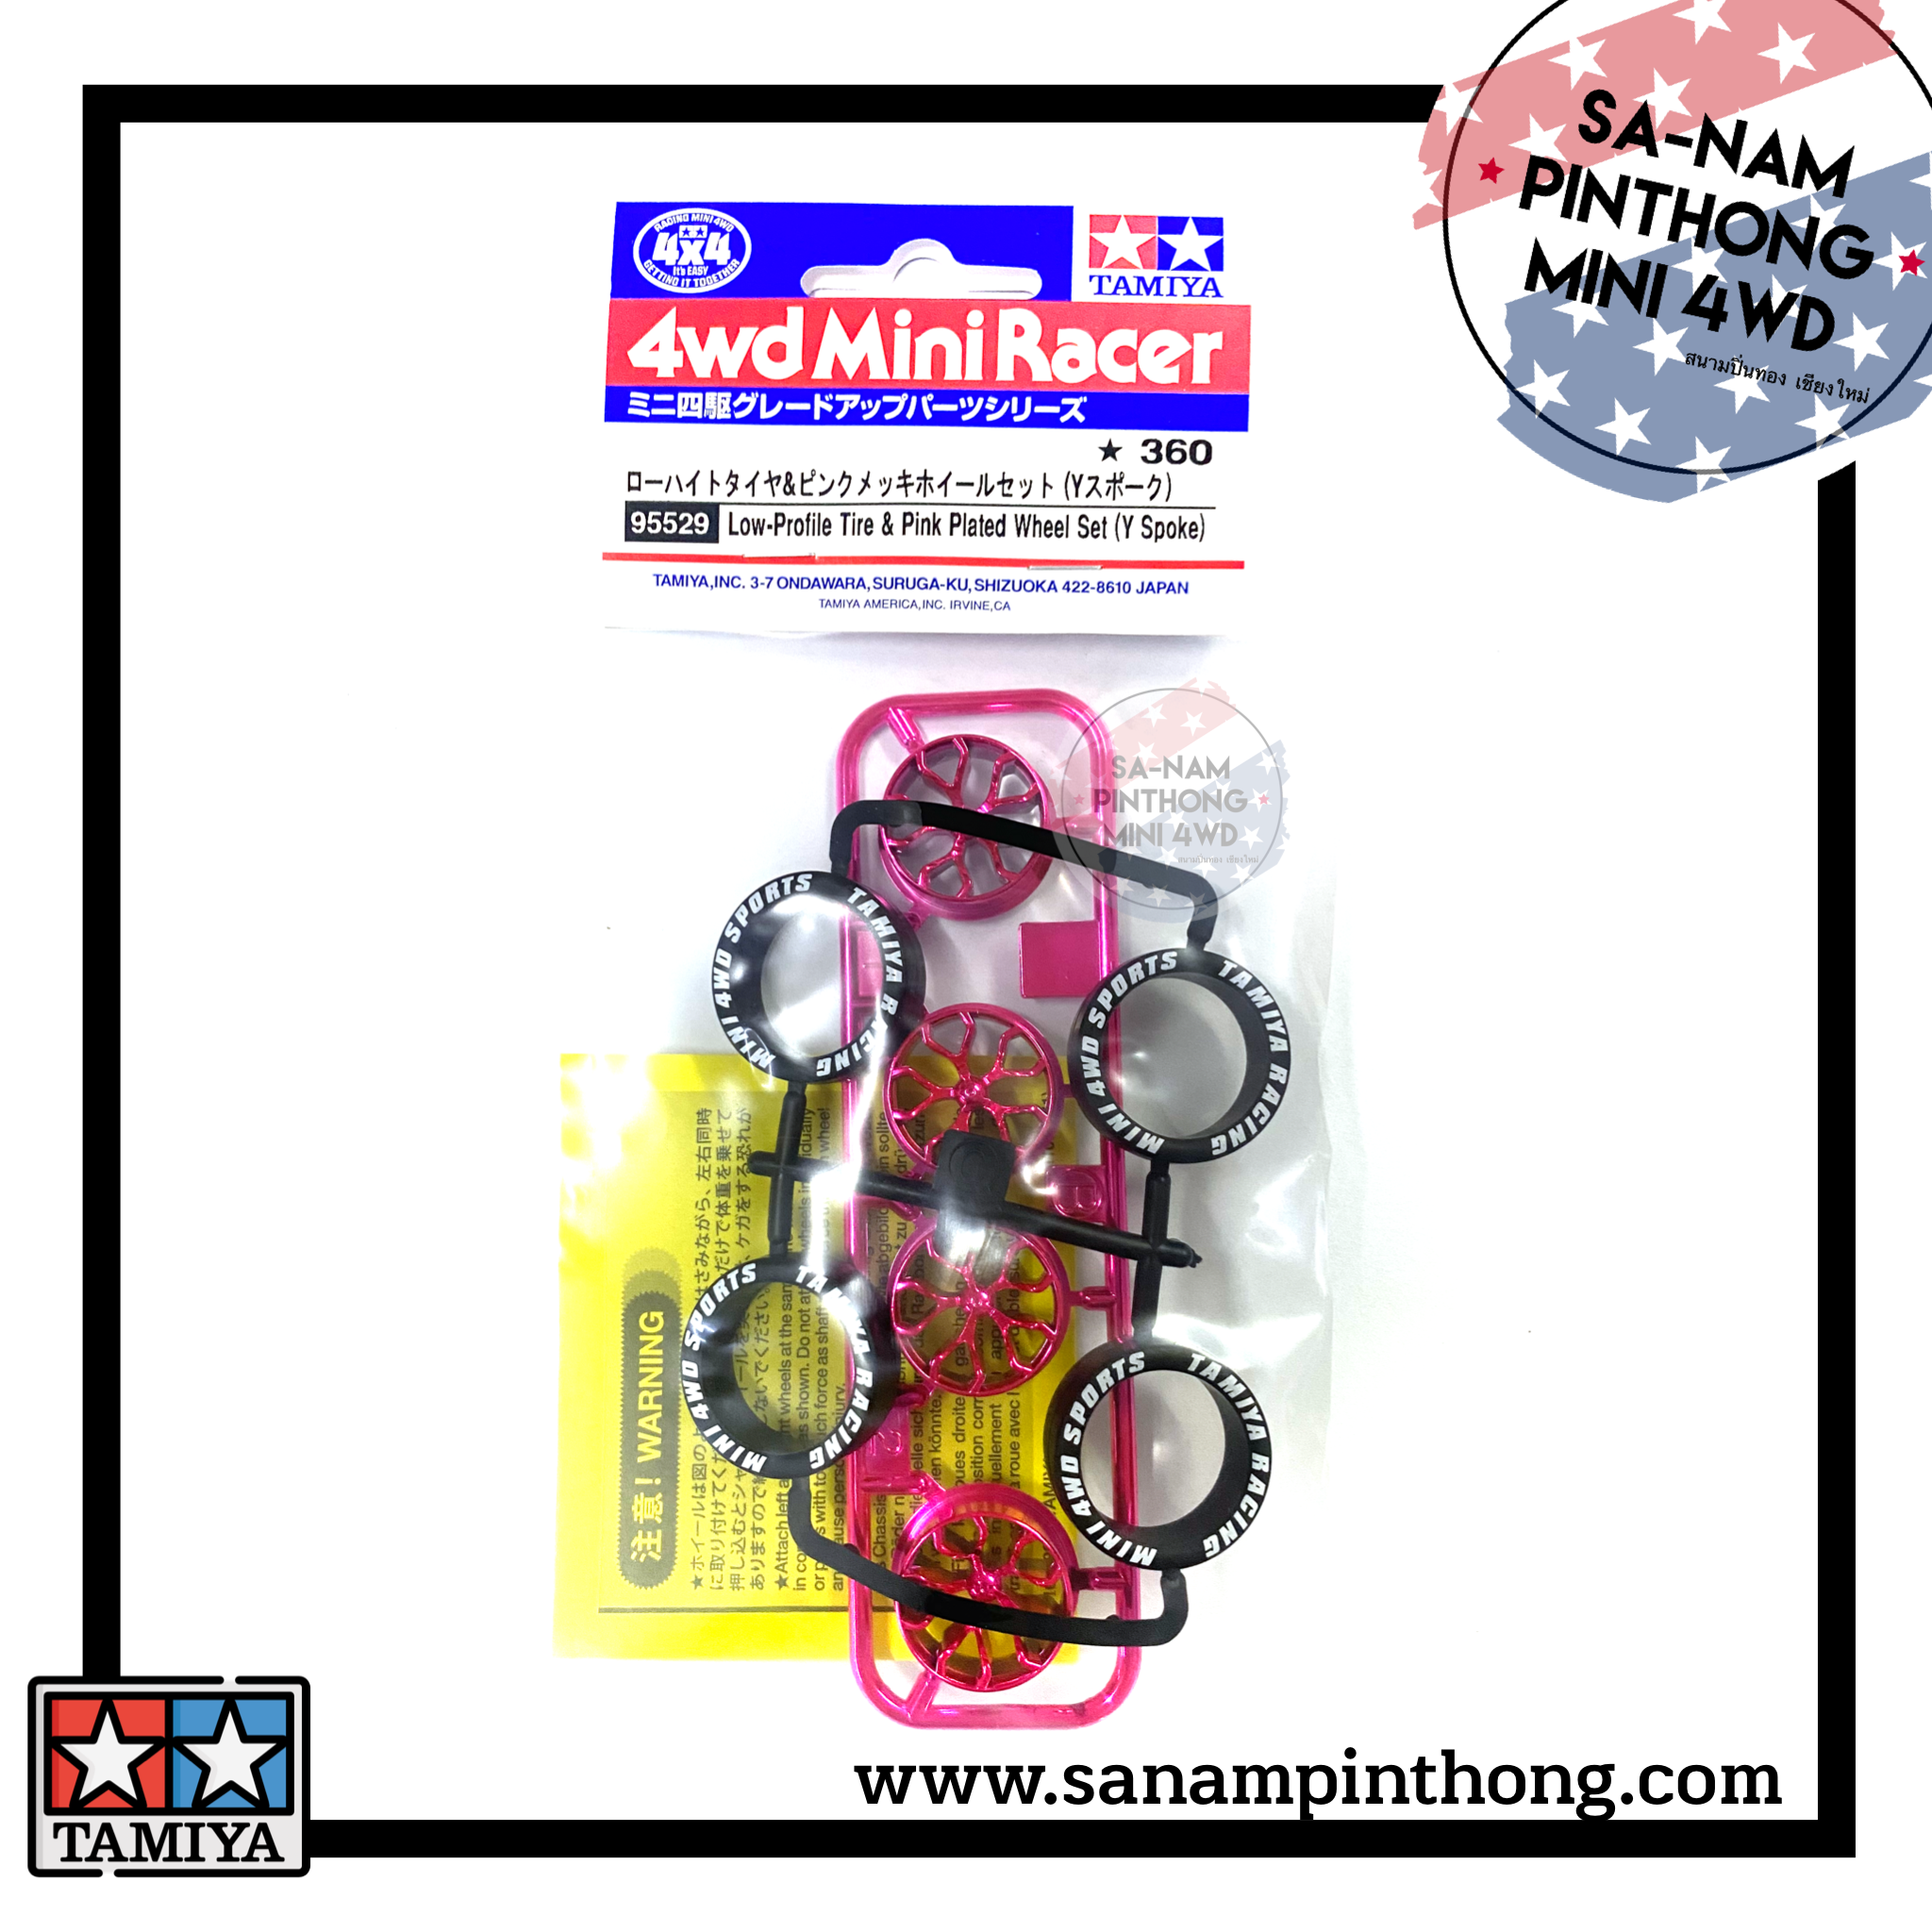 Tamiya 95529 Mini 4wd Low-profile Tire & Pink Plated Wheel Set for sale online y Spoke 